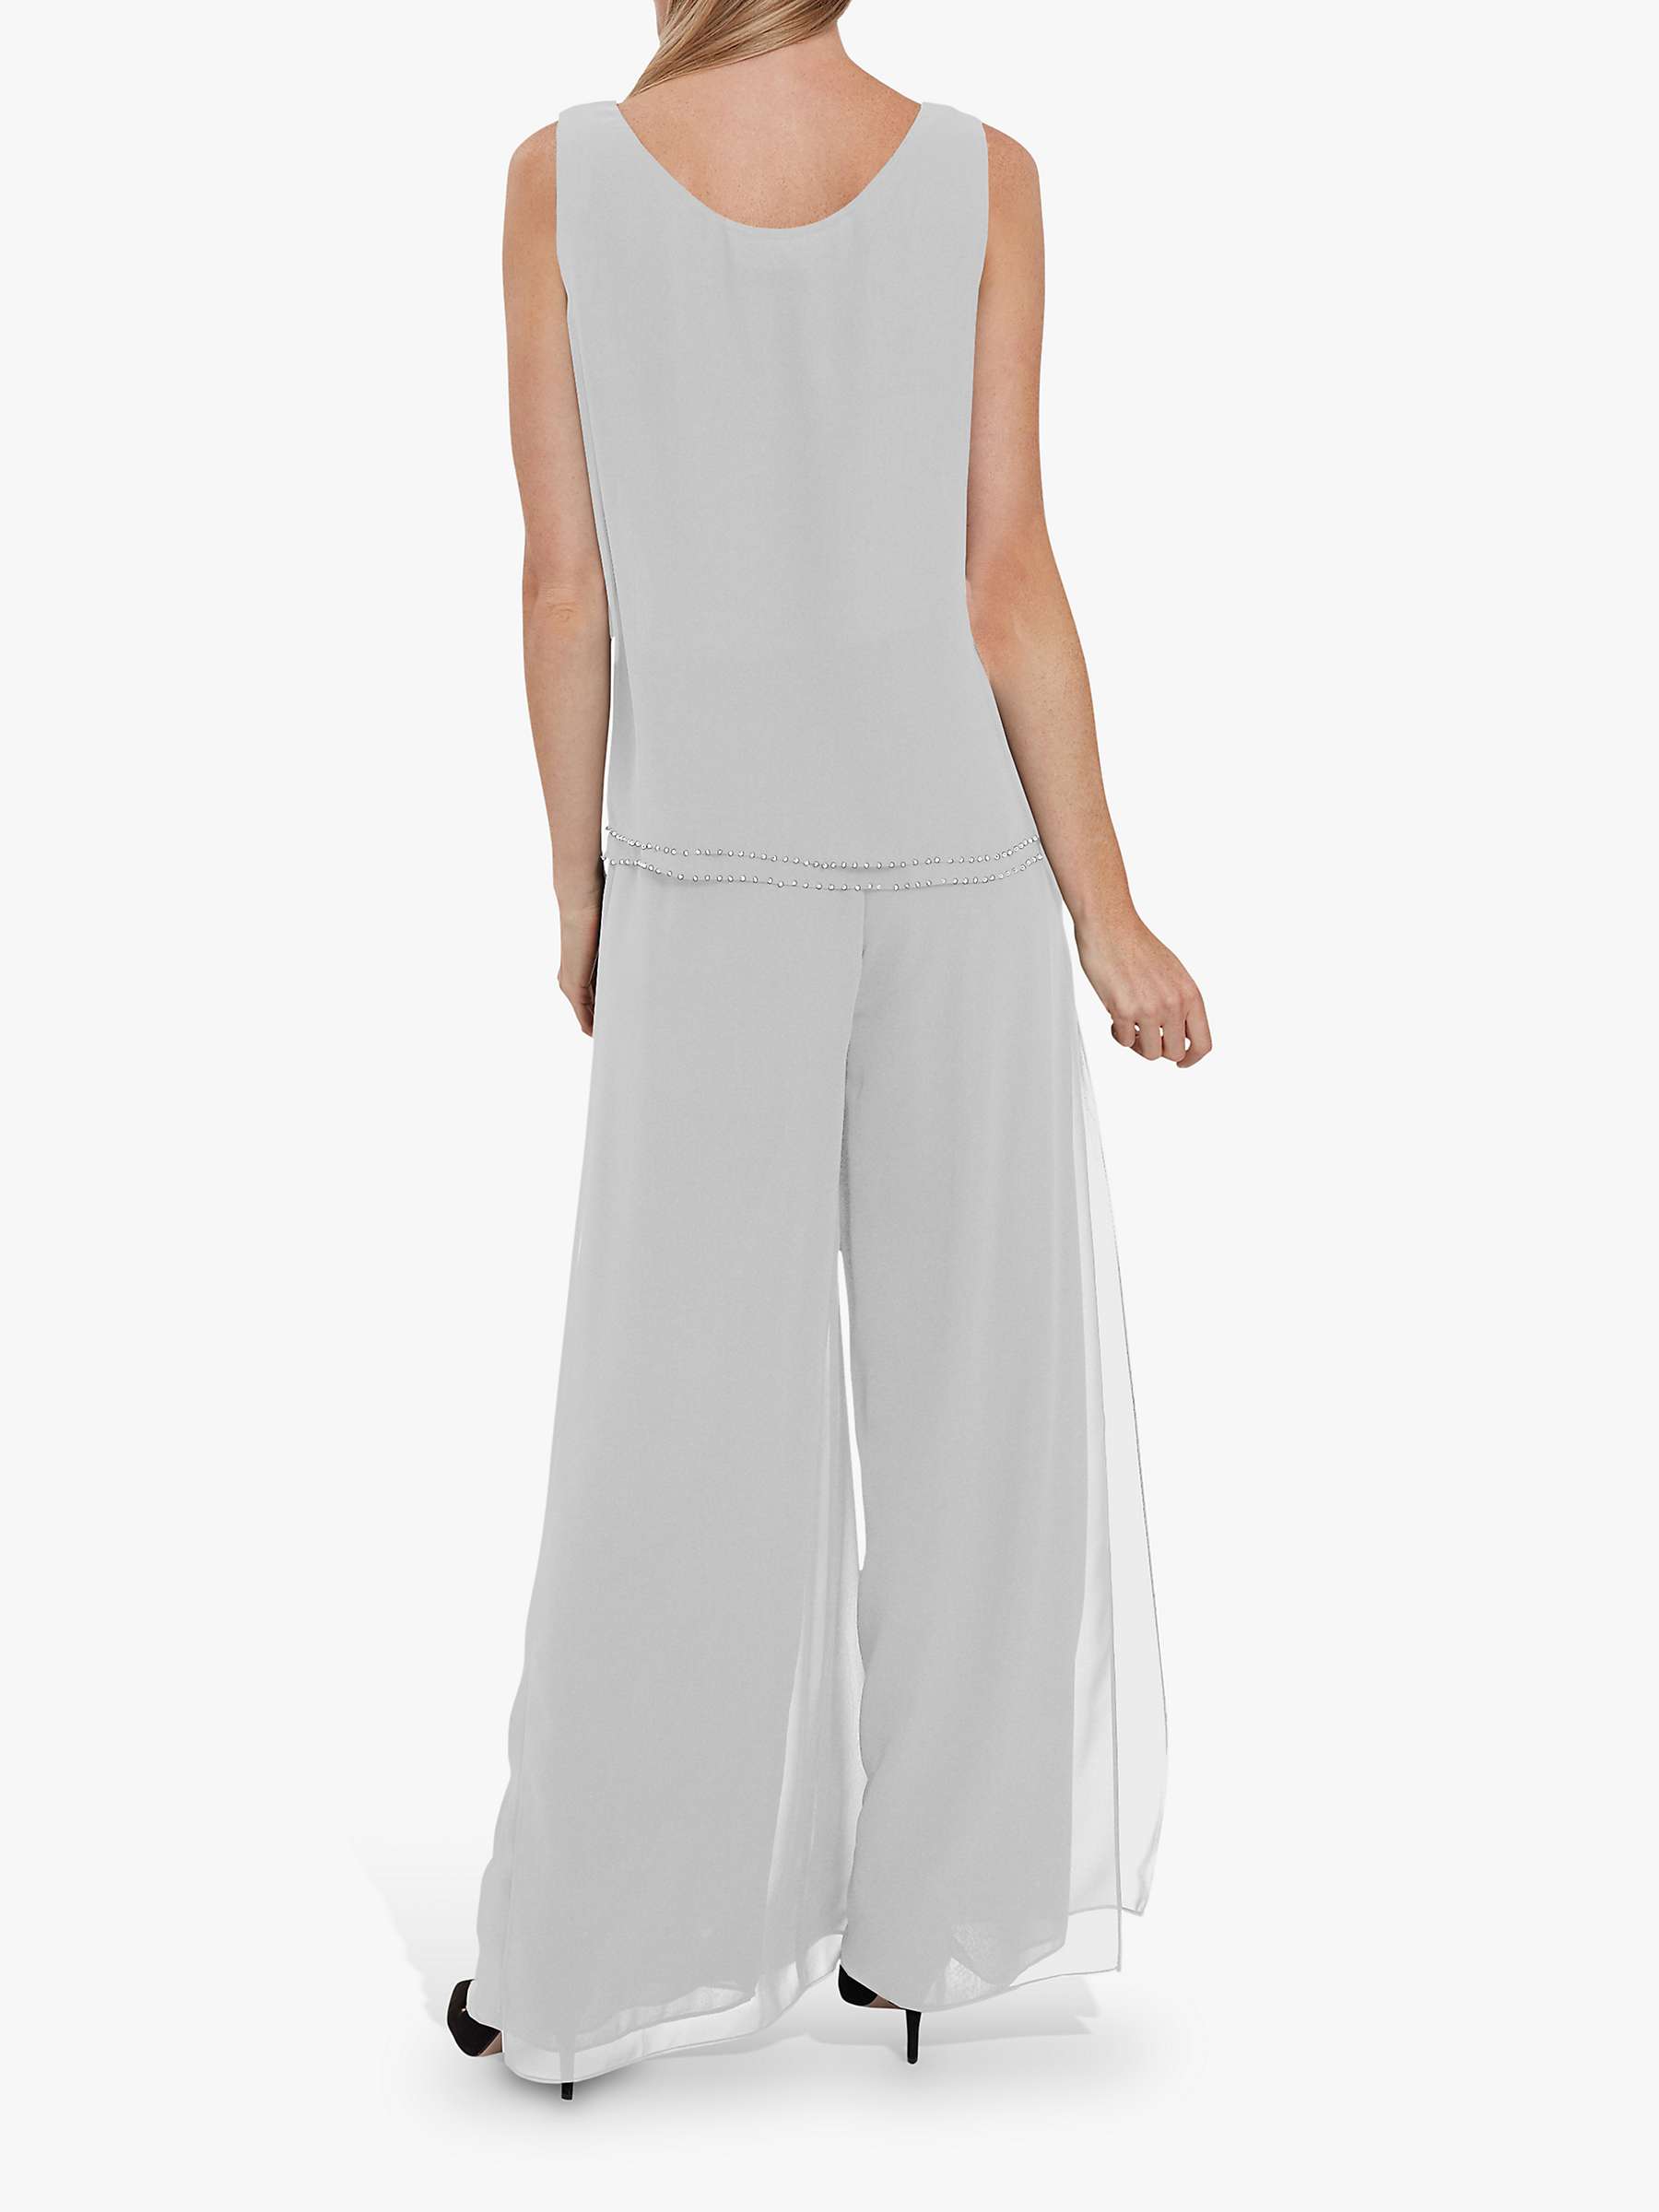 Buy Gina Bacconi Double Layer Chiffon Cami Top Online at johnlewis.com